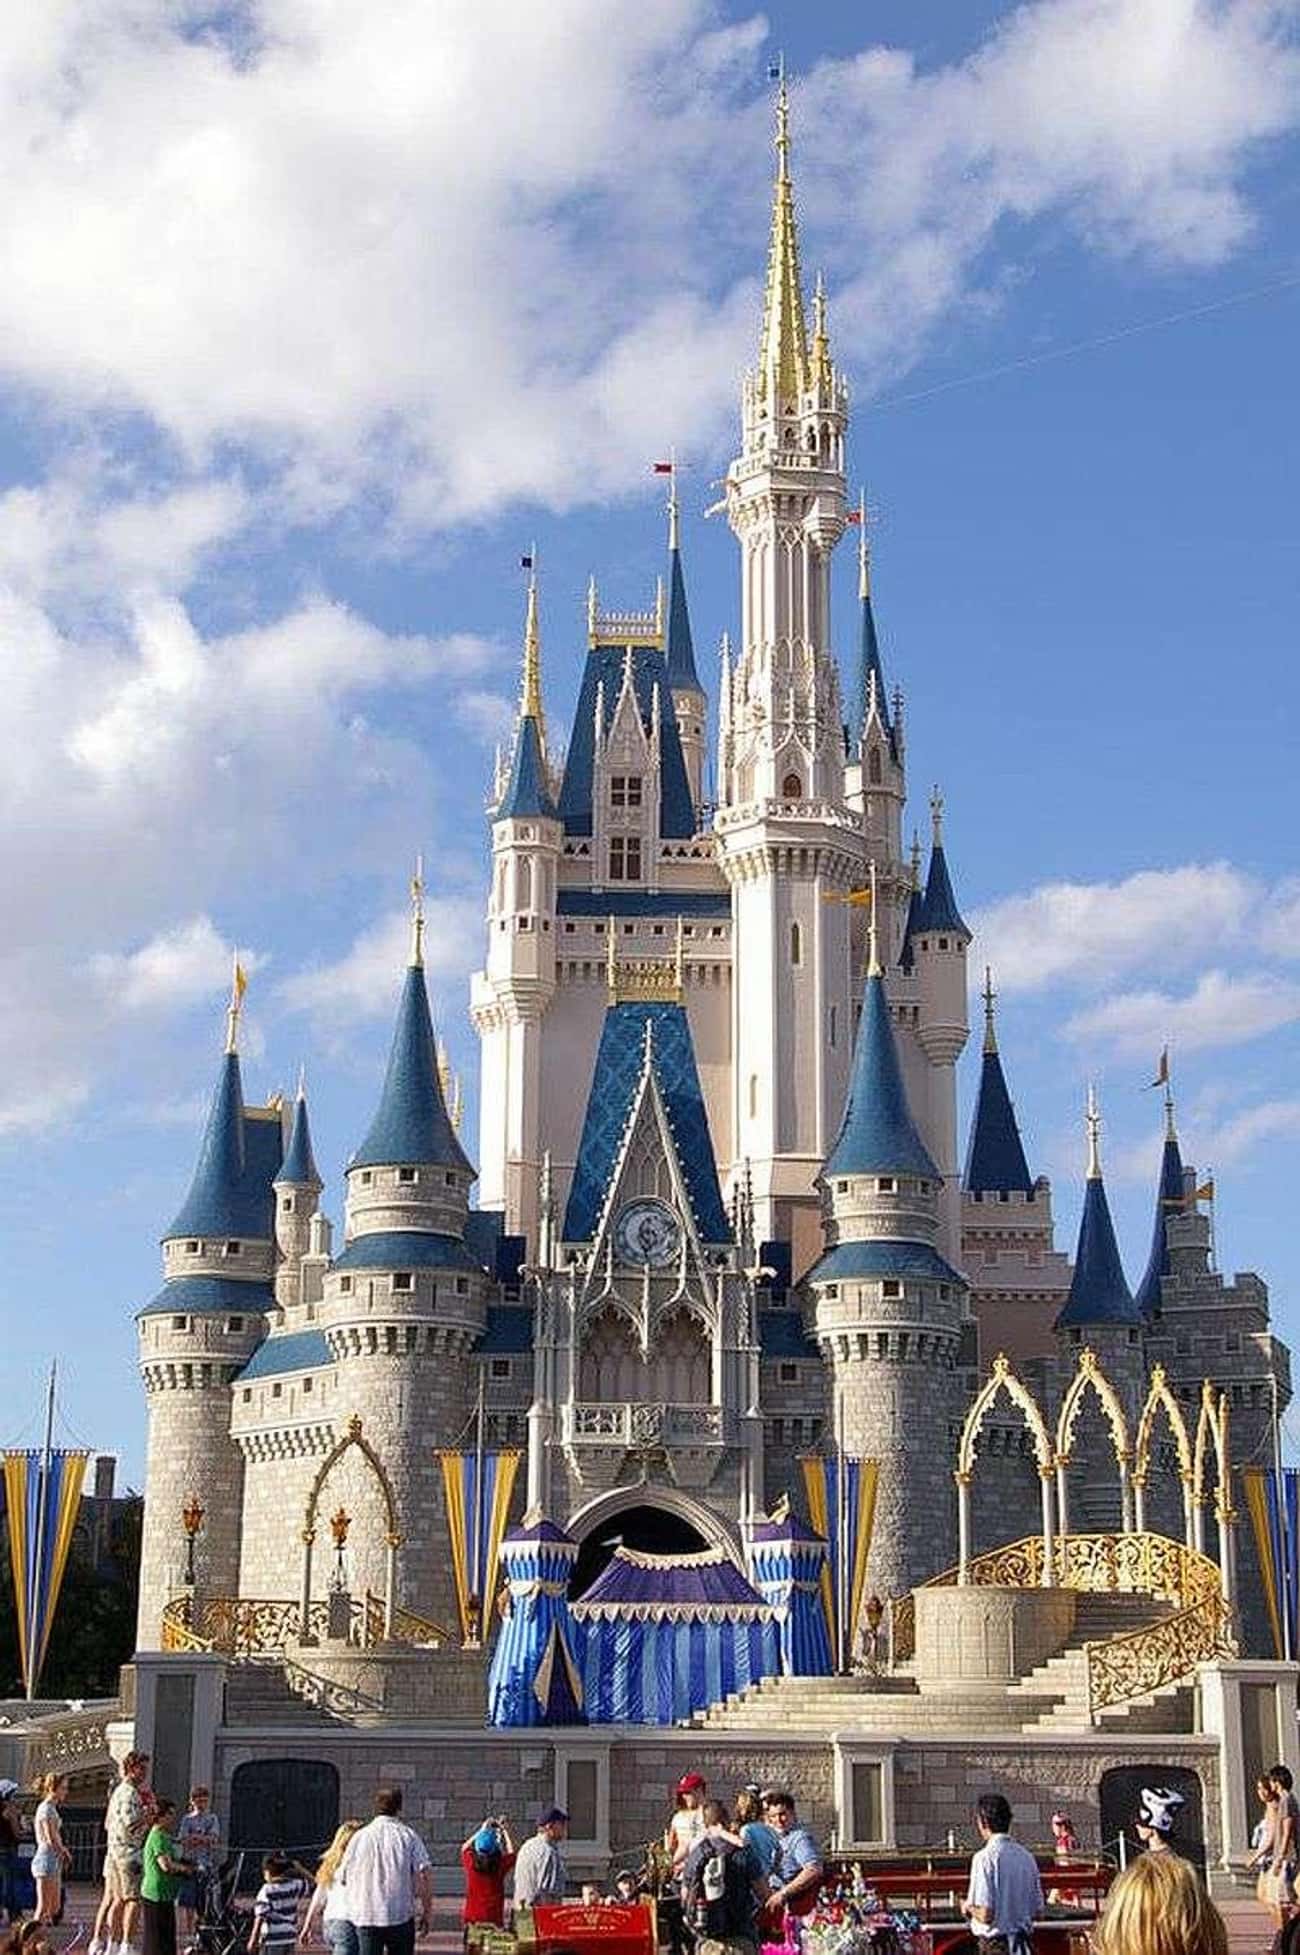 The FAA Put A Flight Restriction On Disney World Airspace After 9/11